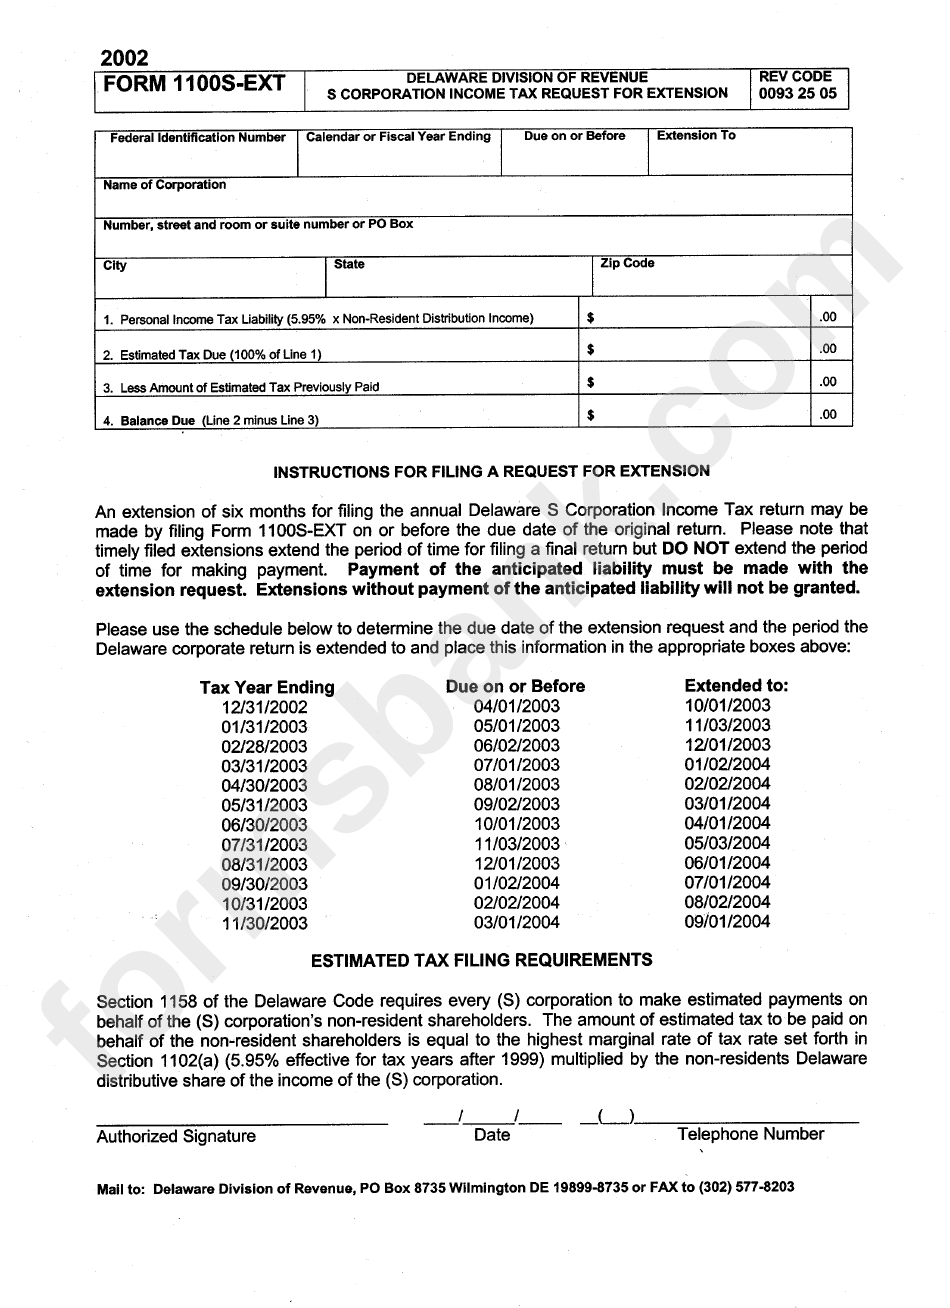 Form 1100s-Ext - S Corporation Income Tax Request For Extension - 2002